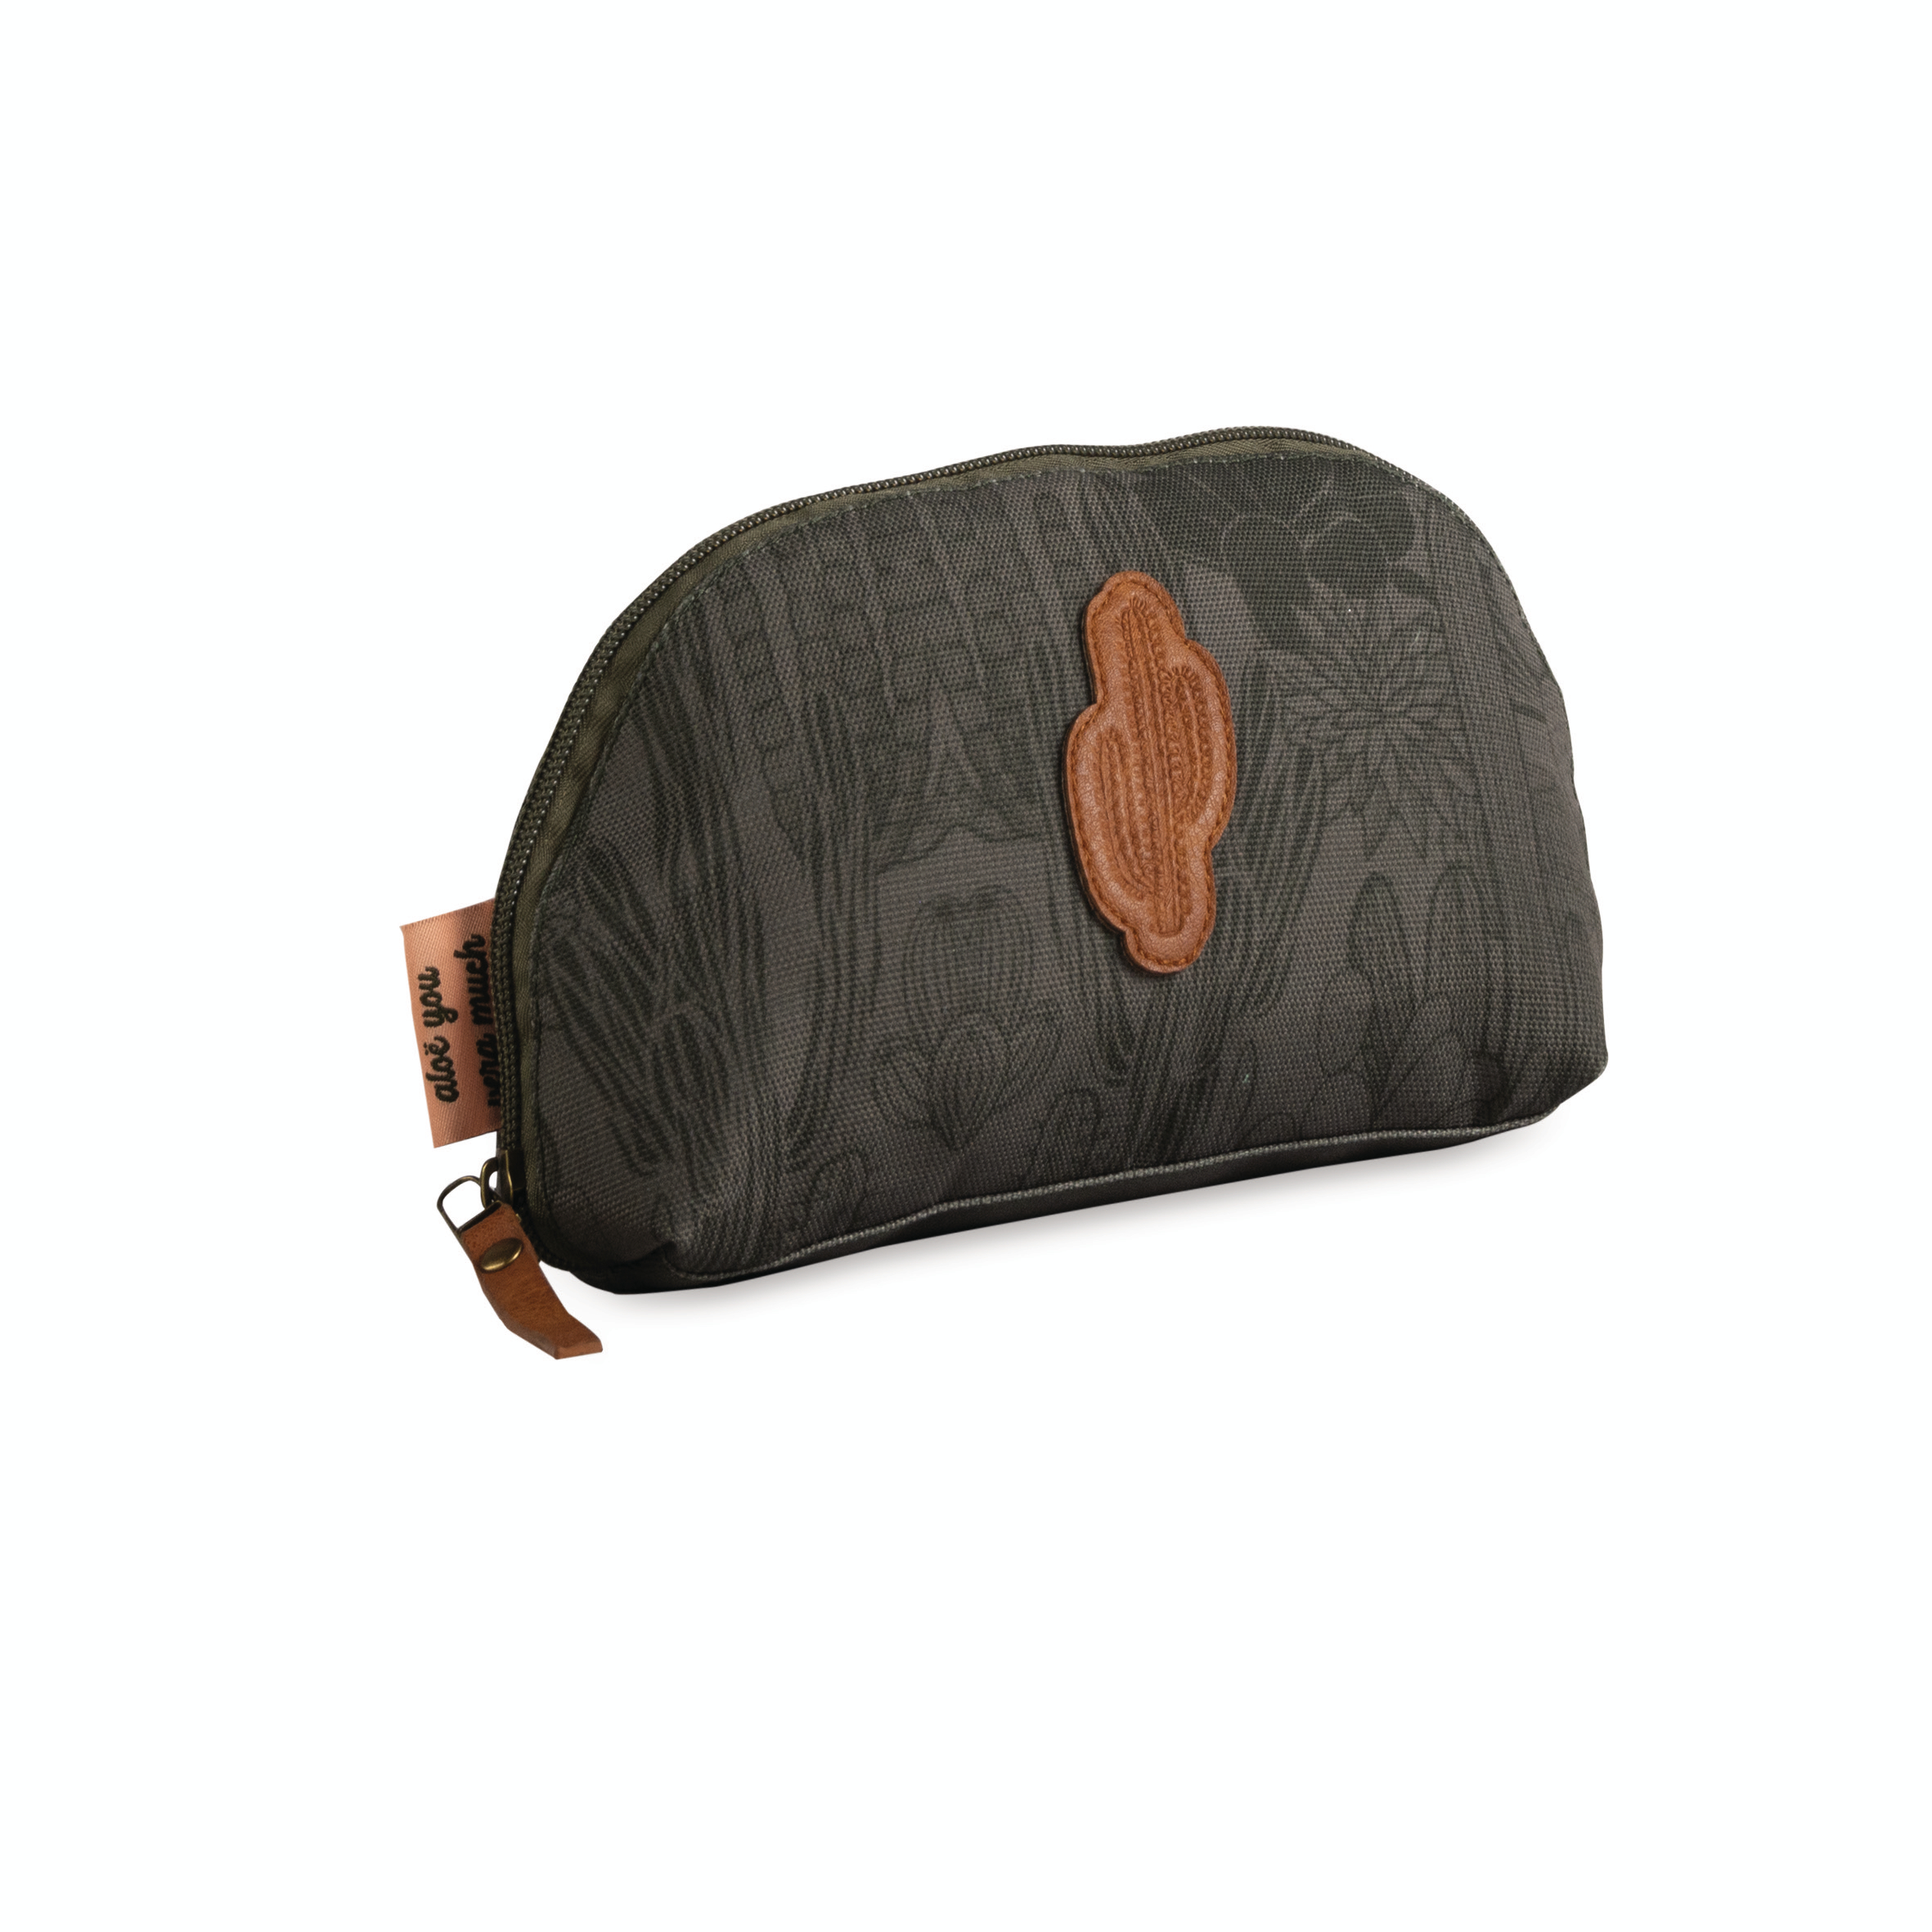 ROOST Trousse Midnight Gold 21cm 528483 Arizona, cosmetic